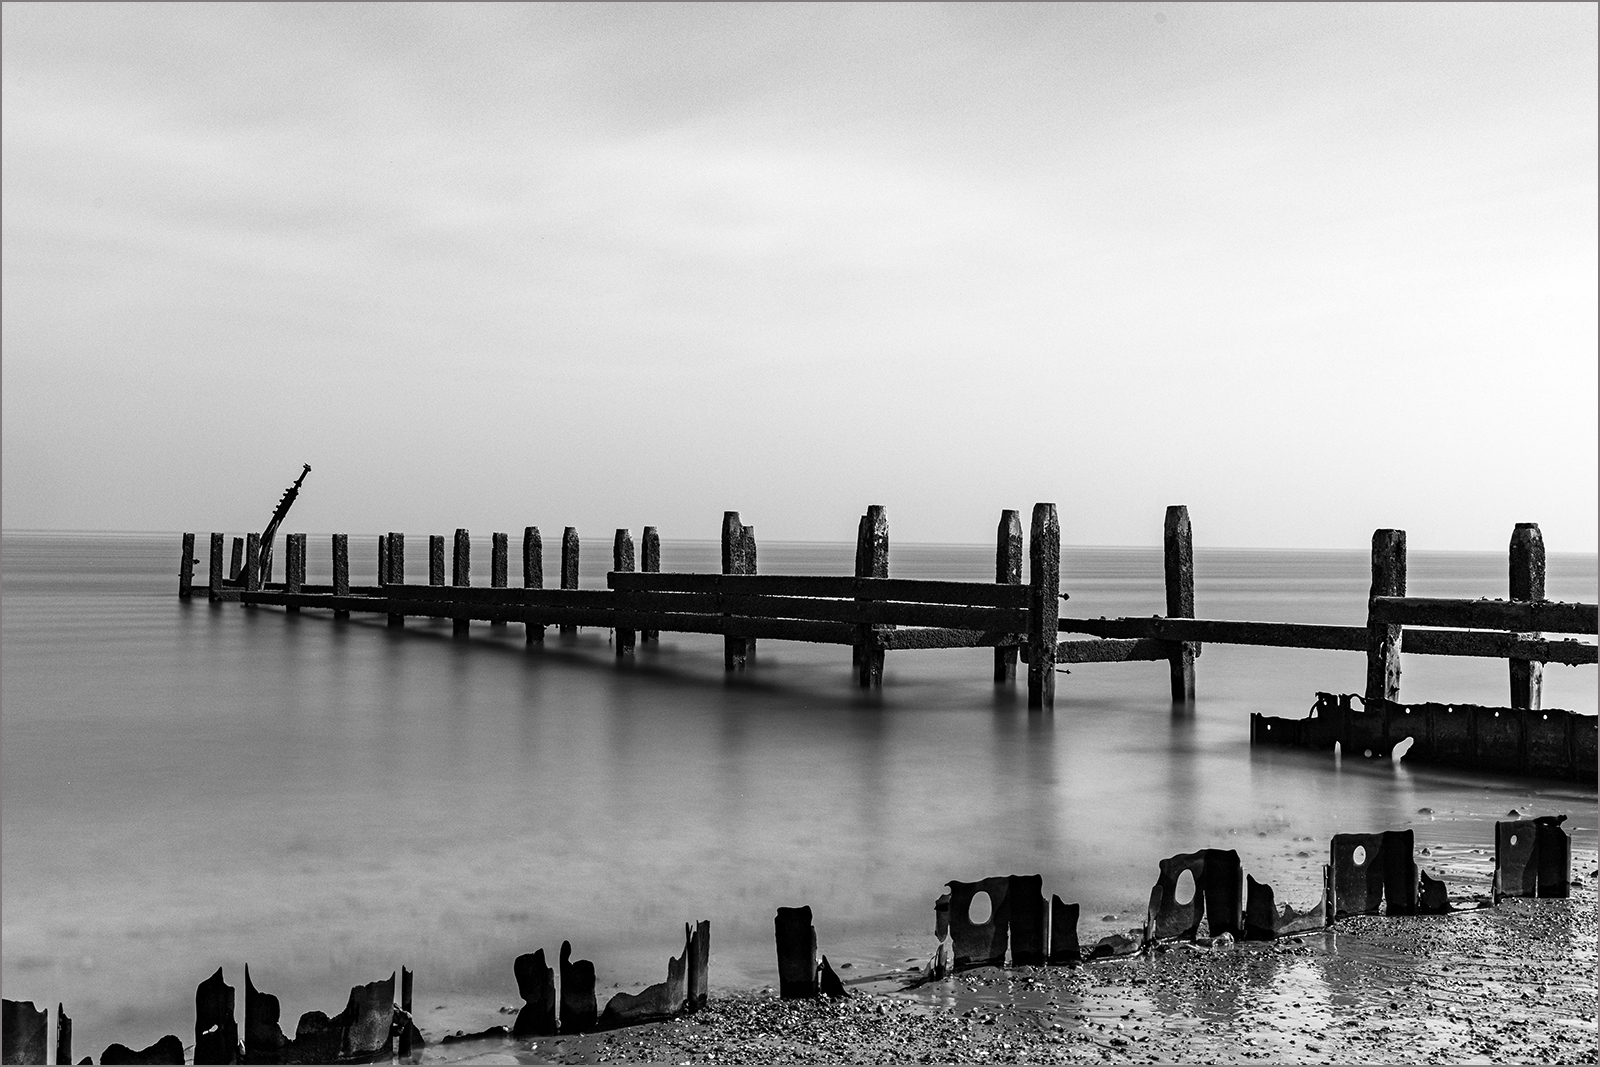 Sea Defences at Cart Gap, Norfolk by Chris Griffin